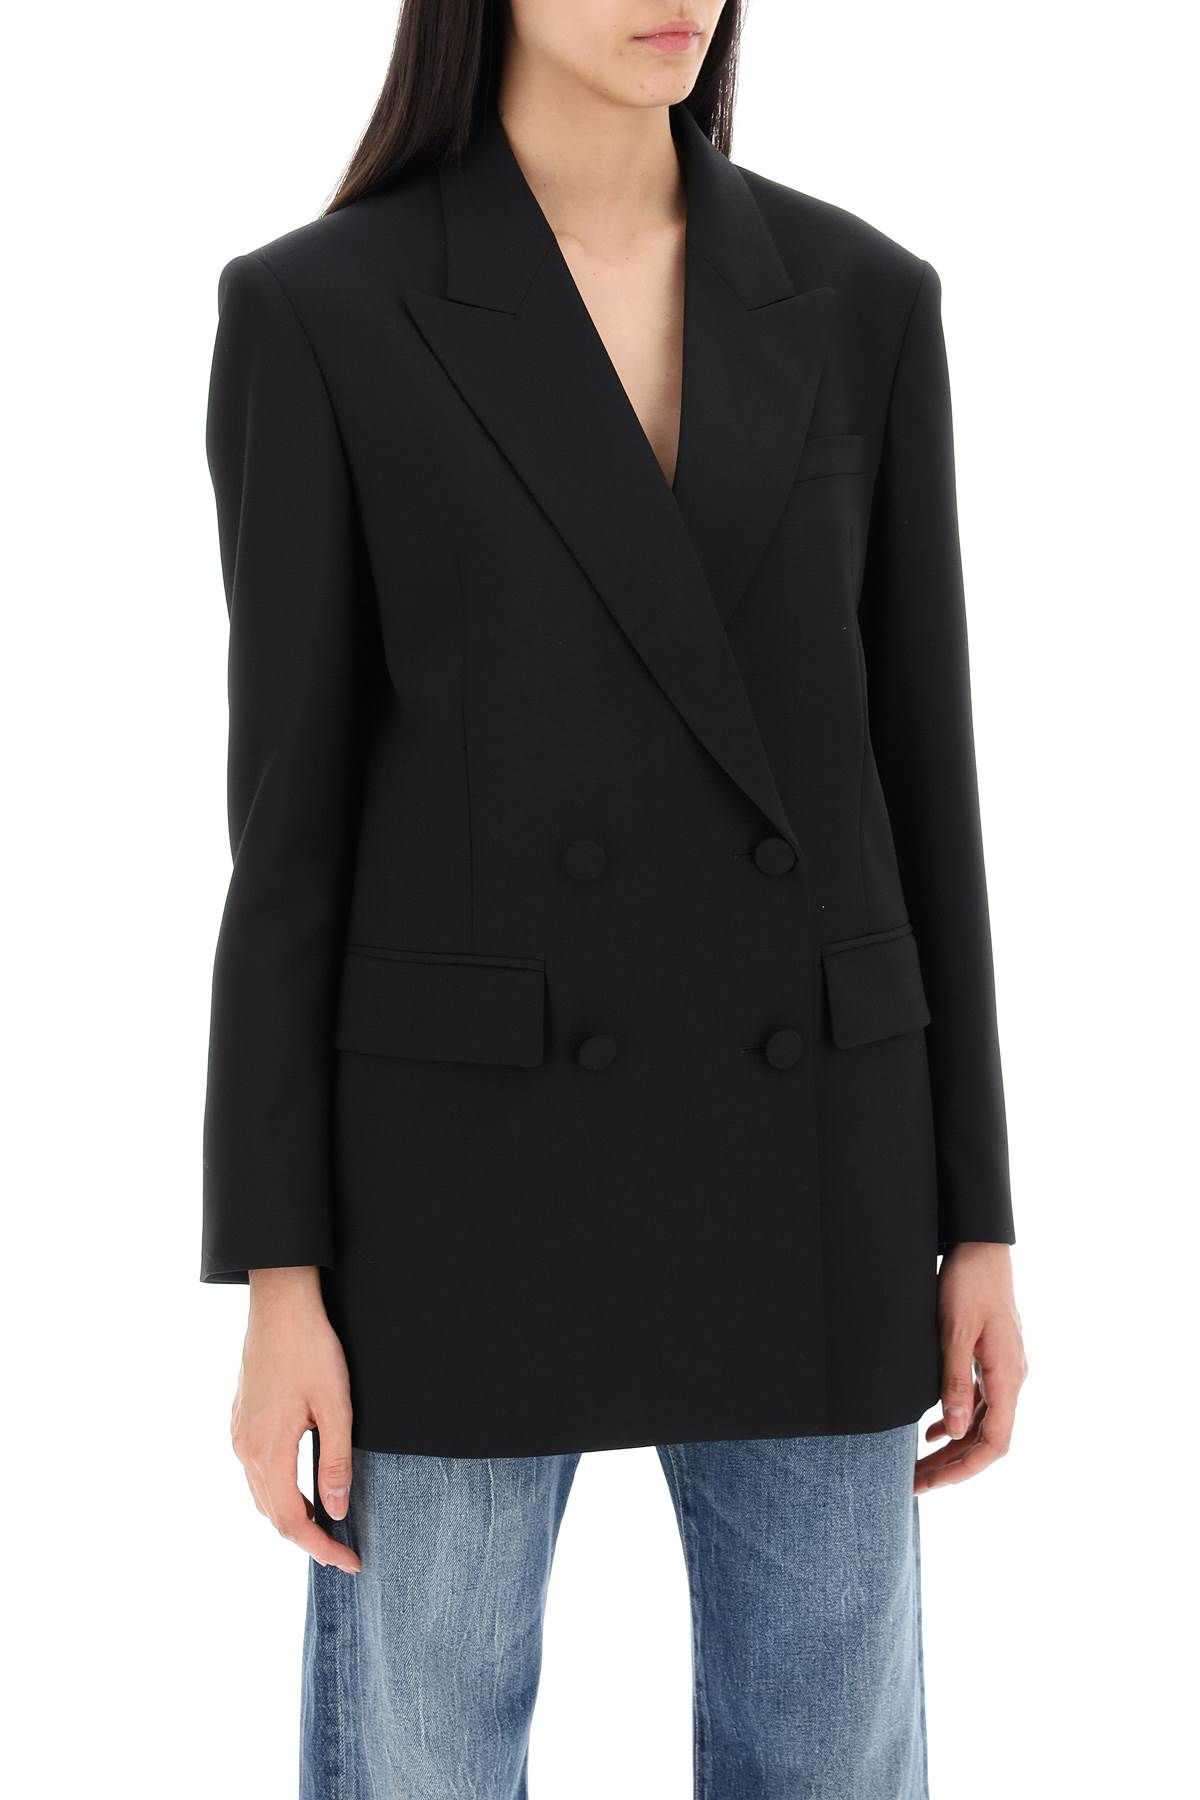 Shop Valentino Tailored Wool Jacket For Men In Black